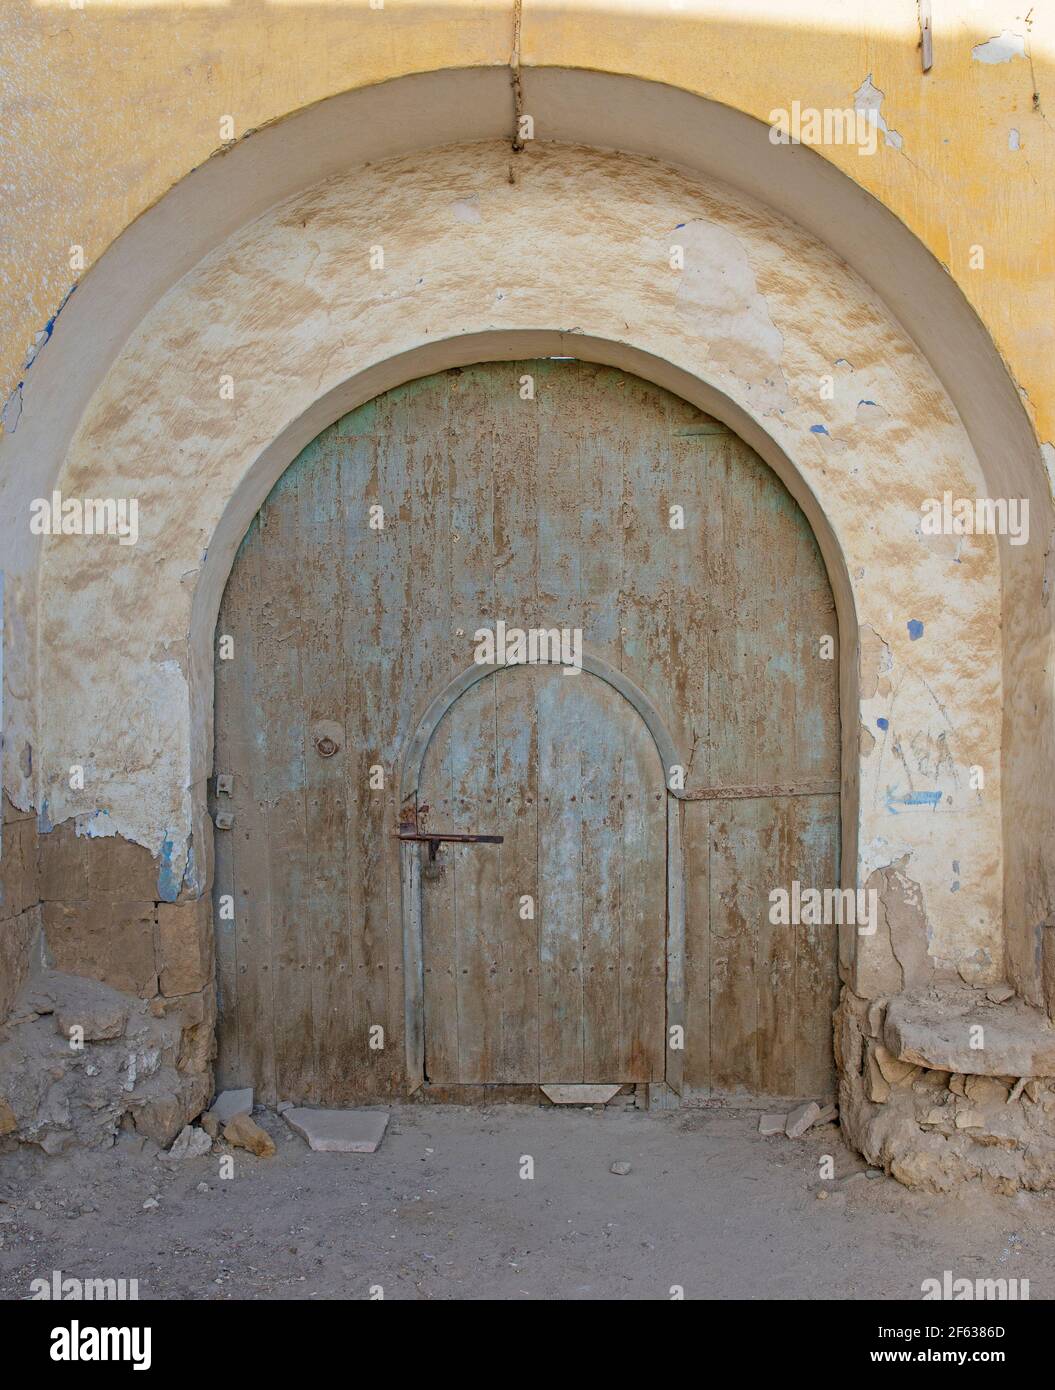 Old rustic wooden arched door in wall of abandoned traditional egyptian house Stock Photo